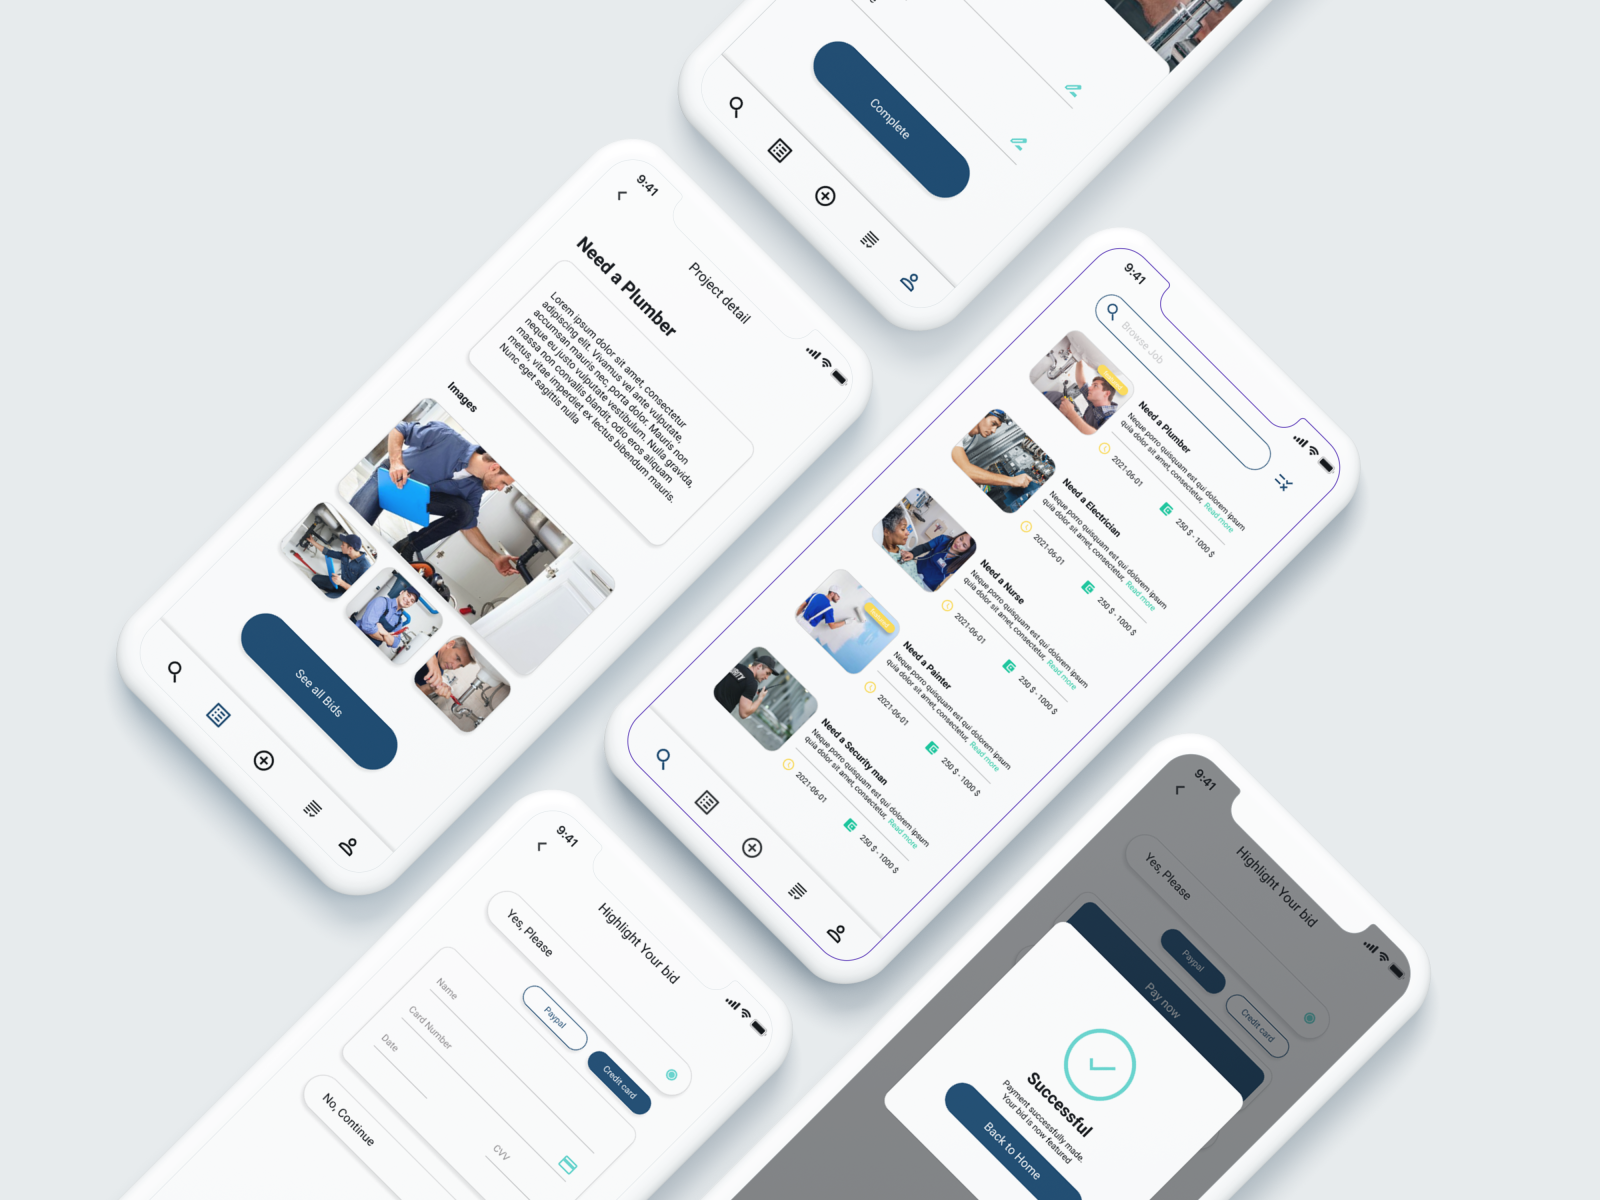 Clean and modern by Usep Sumaryana on Dribbble